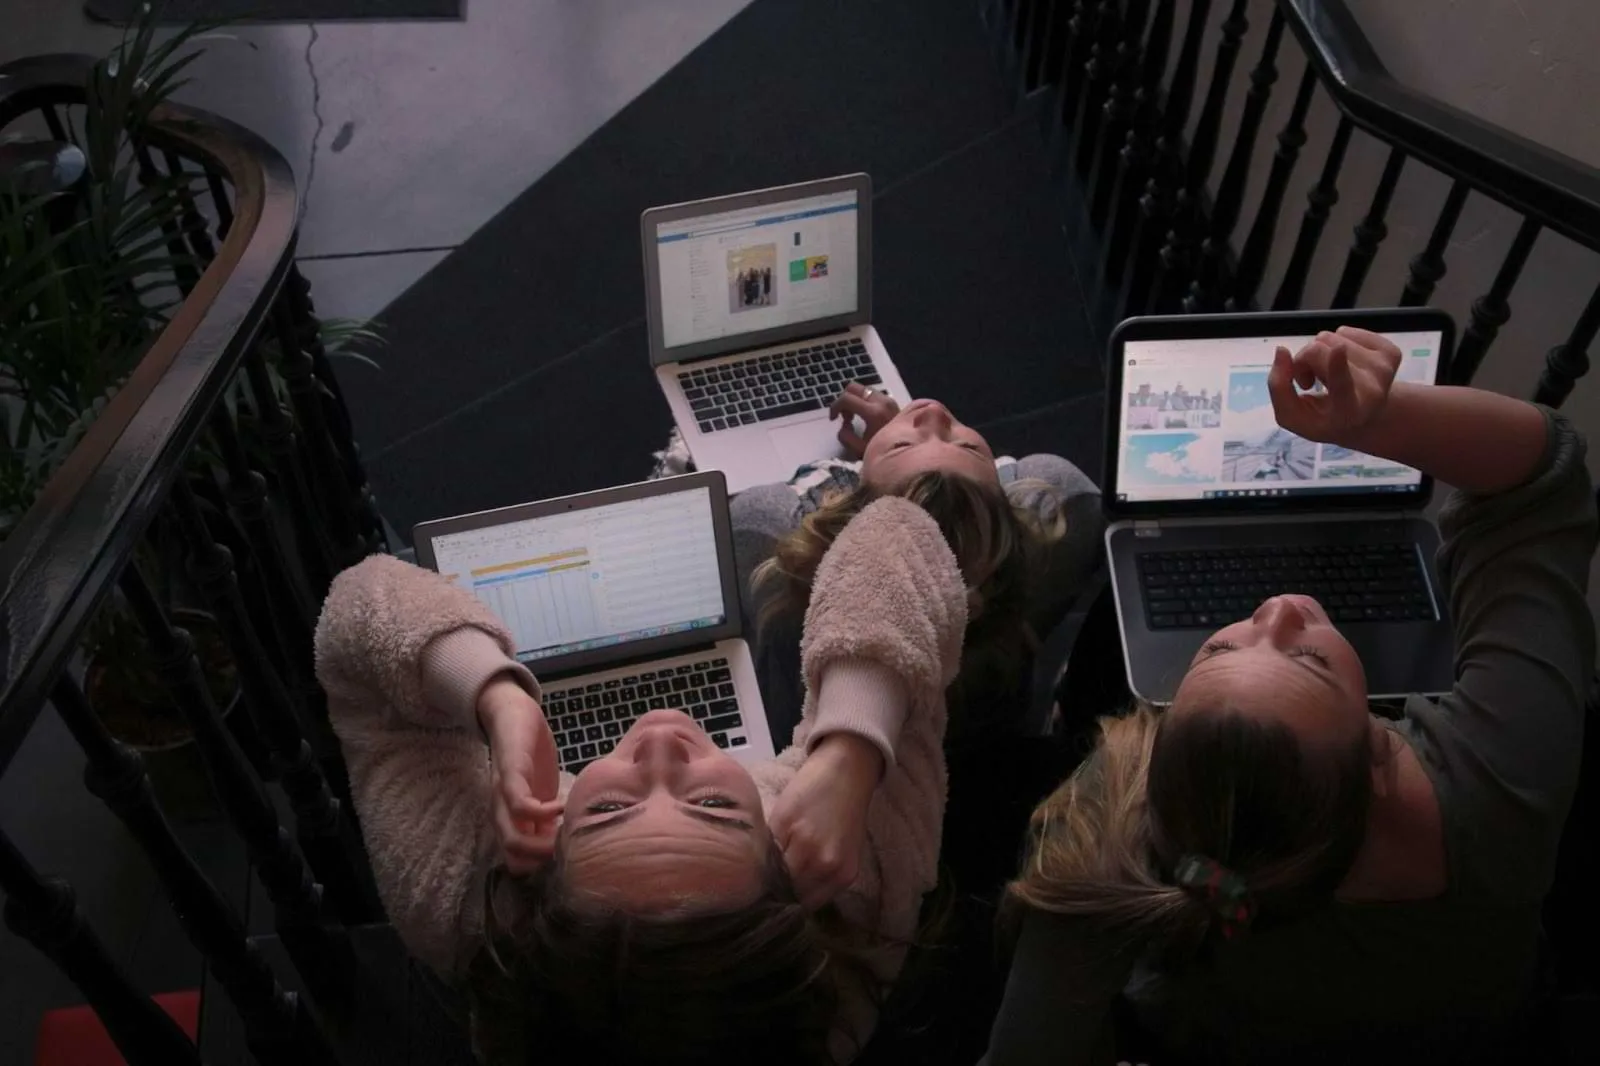 Two people in front of their laptops